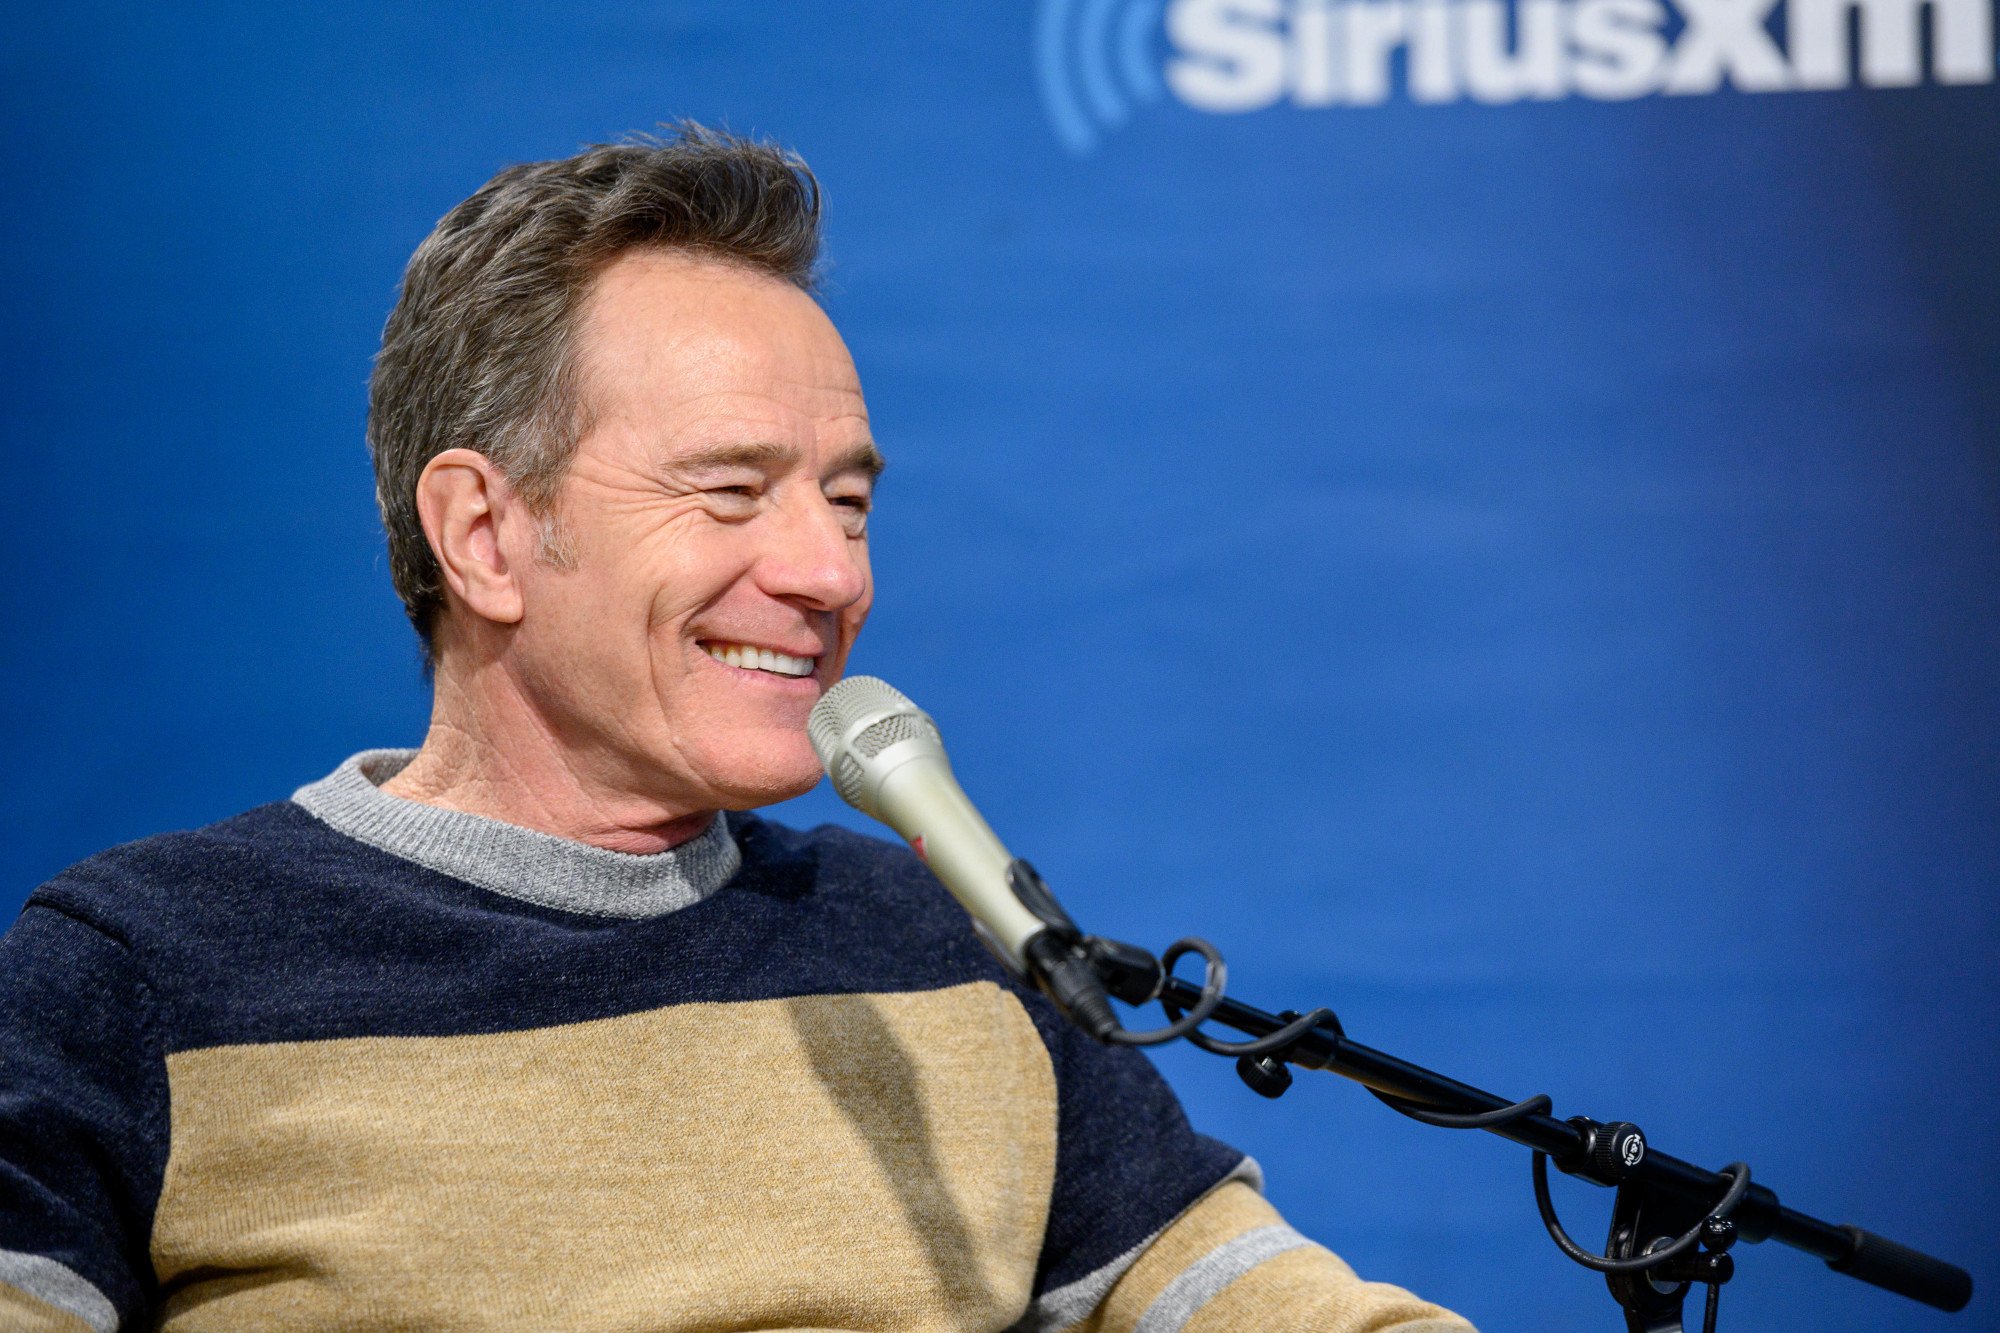 Breaking Bad star Bryan Cranston wearing a grey, navy, and biege sweater and smiling. There is a microphone in front of him and a SiriusXM Studios wall behind him.